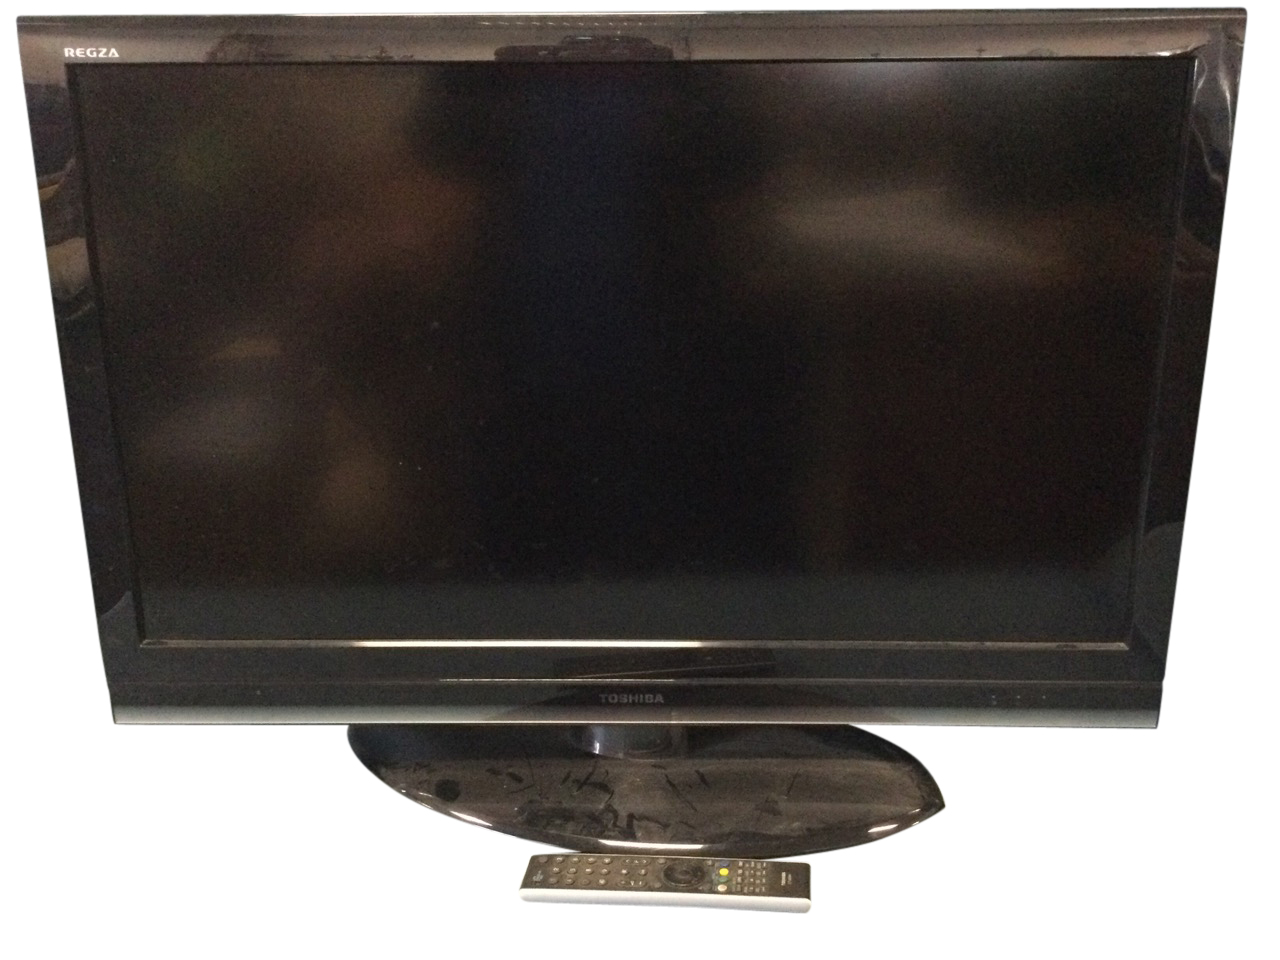 A large Toshiba flatscreen TV with remote - working. (35.25in x 25.5in)